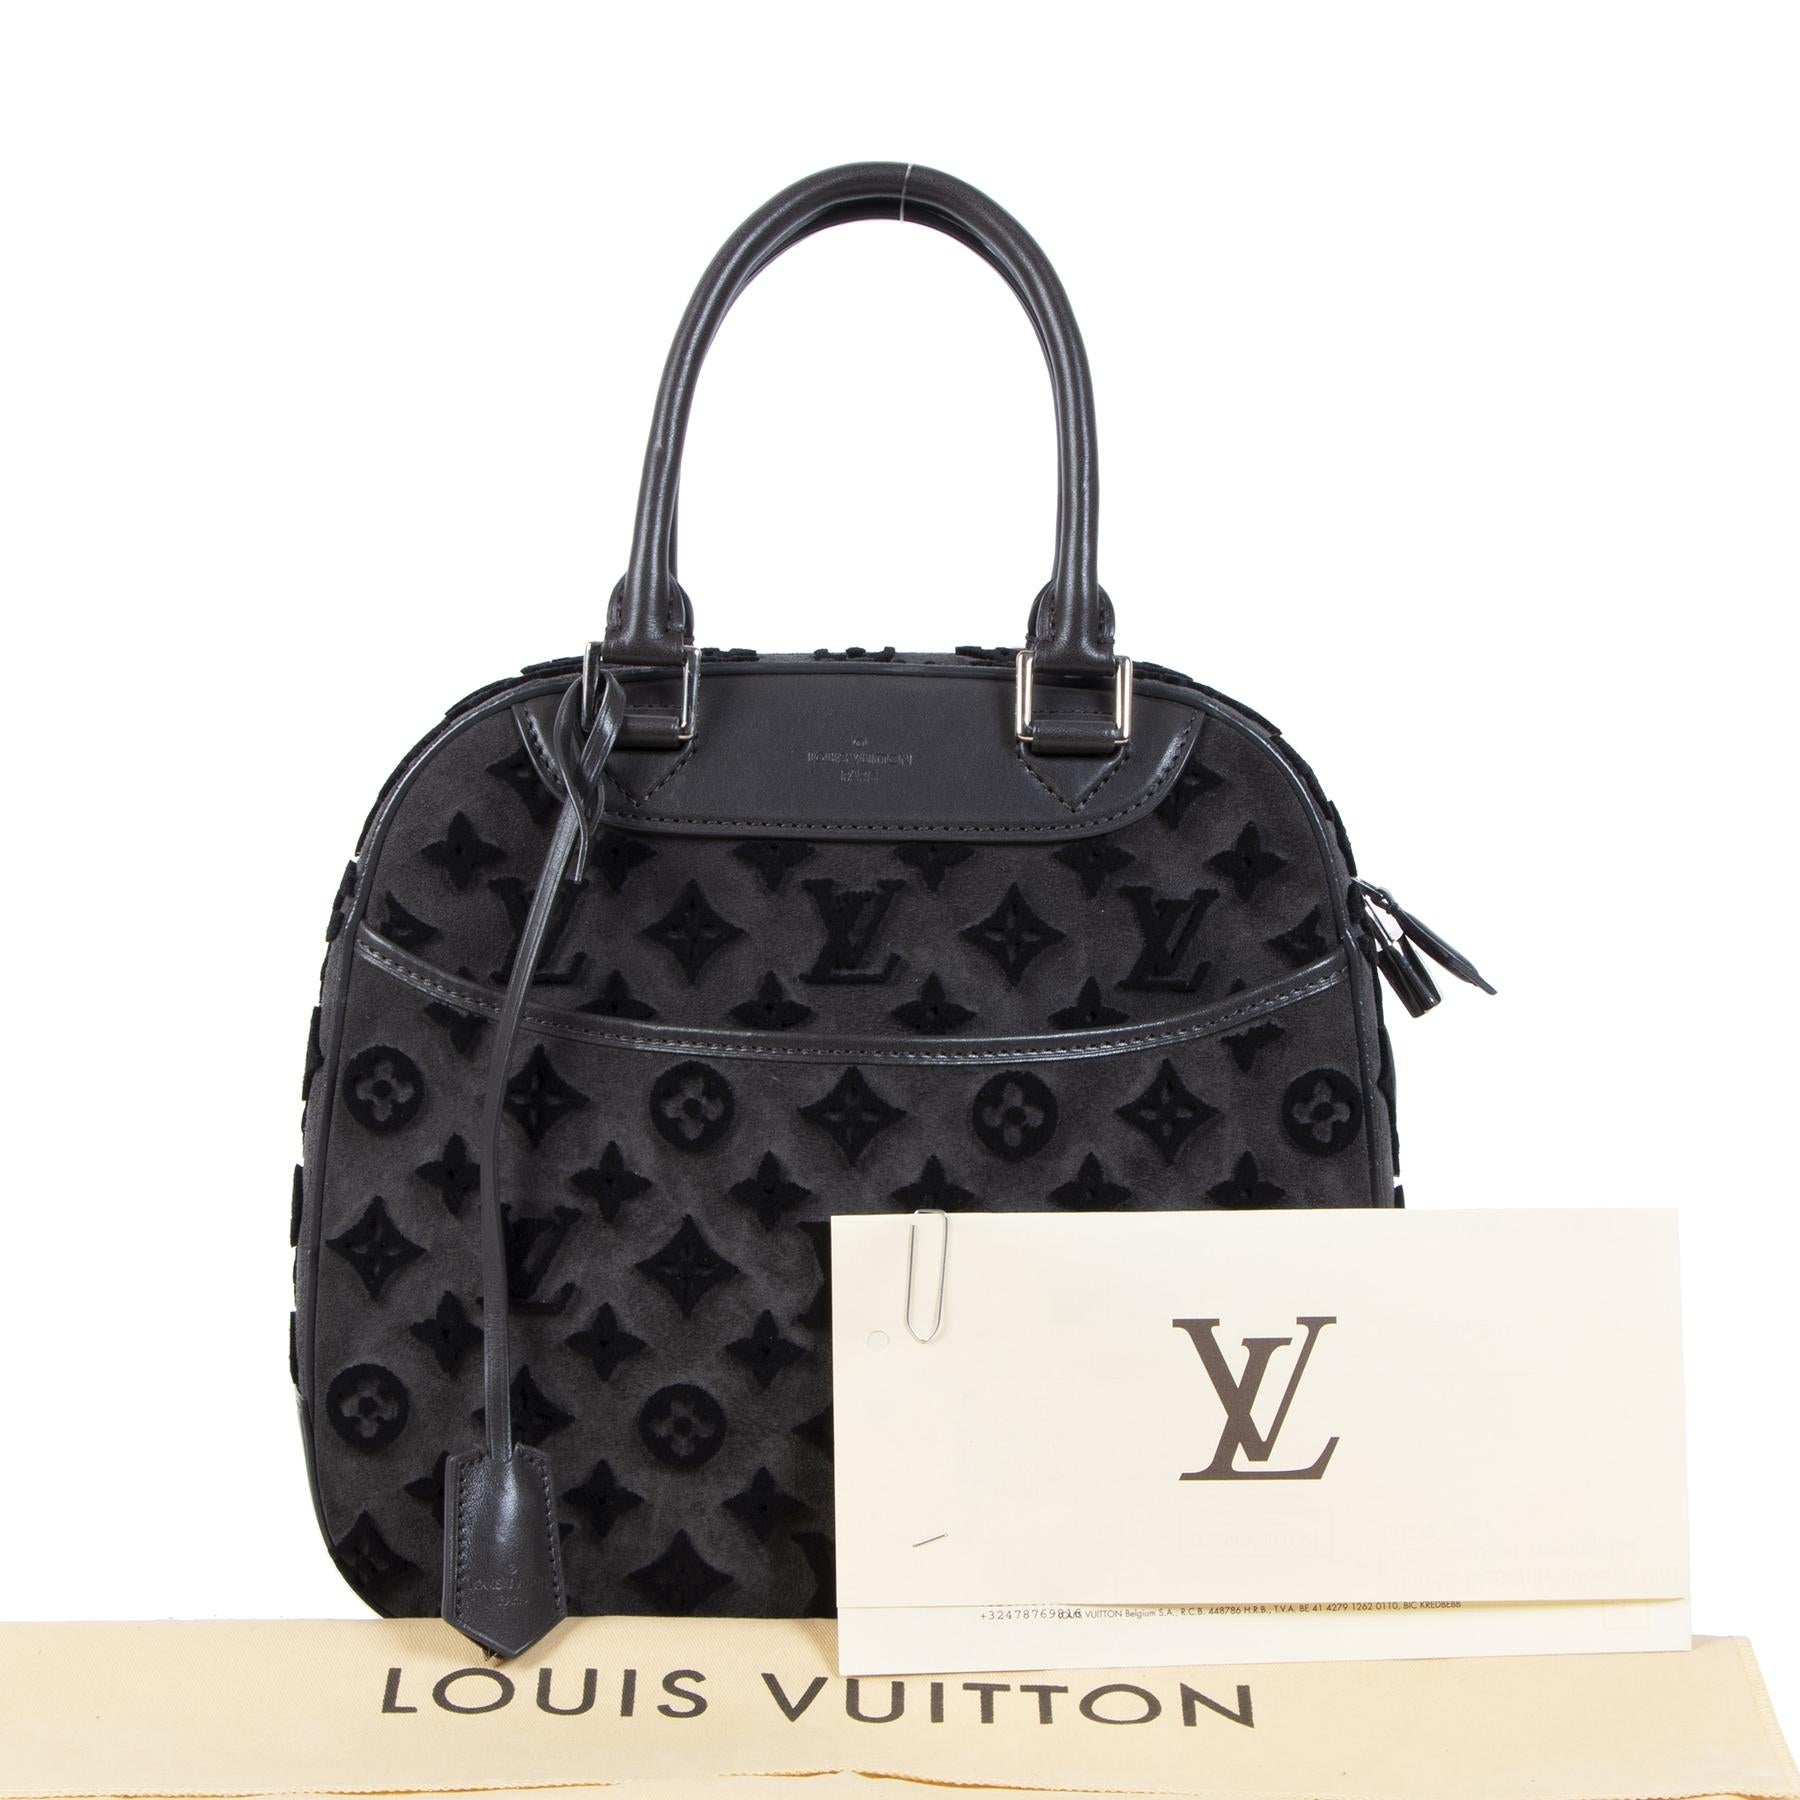 Very good preloved condition

Louis Vuitton Limited Edition Grey Suede Monogram Tuffetage Deauville Bag

This stunning limited edition bag from the Louis Vuitton Pre-Fall 2013 fashion show is one you are most definitely going to want to add to your